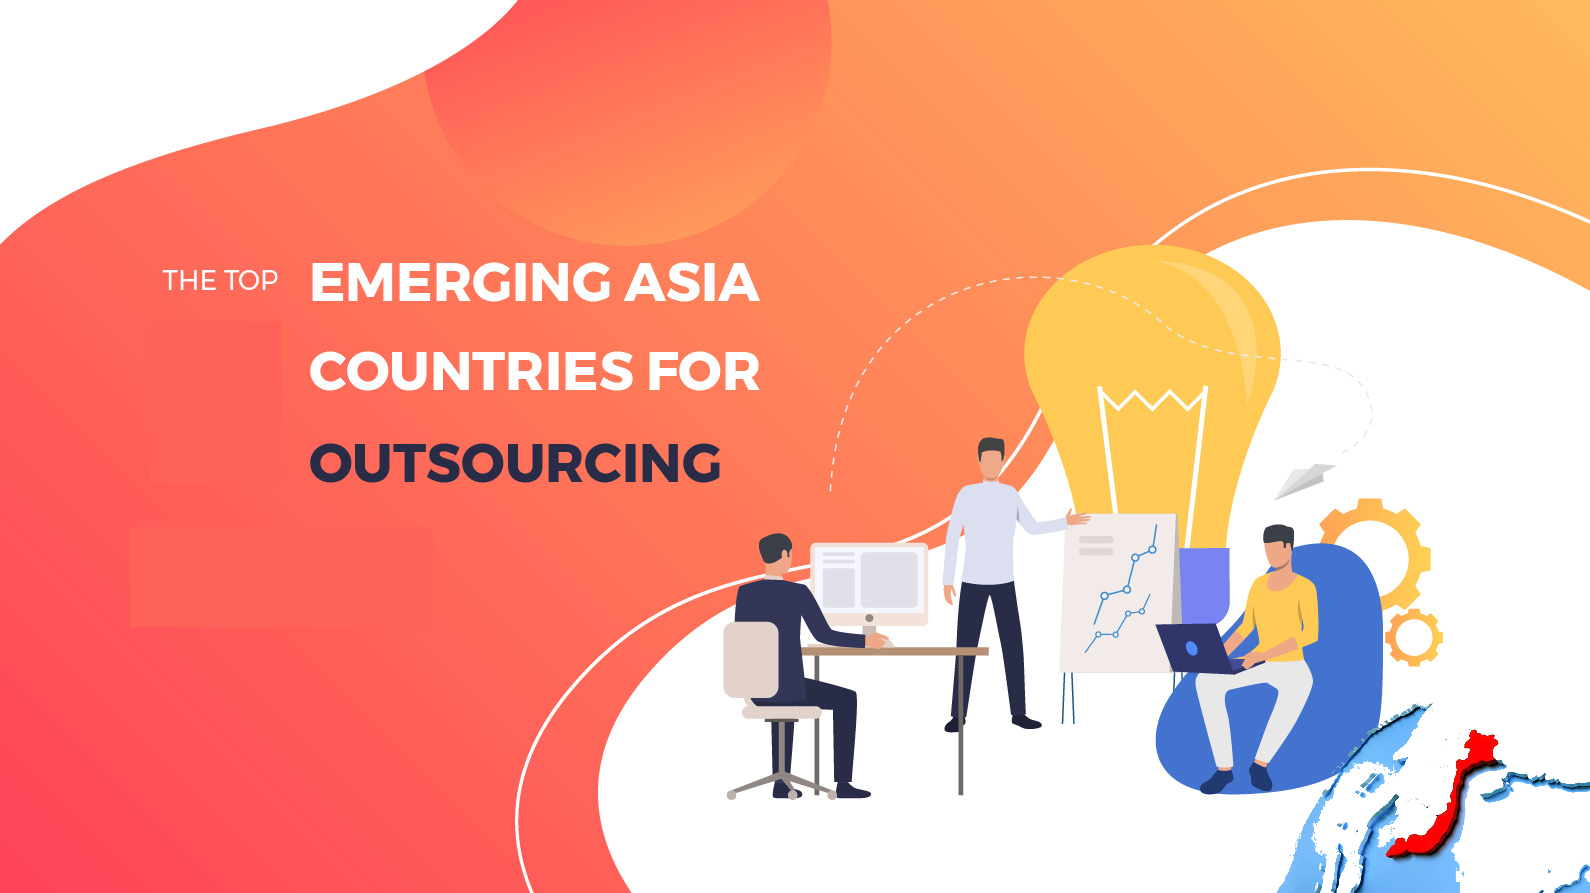 The top emrgeging asian countries for outsourcing